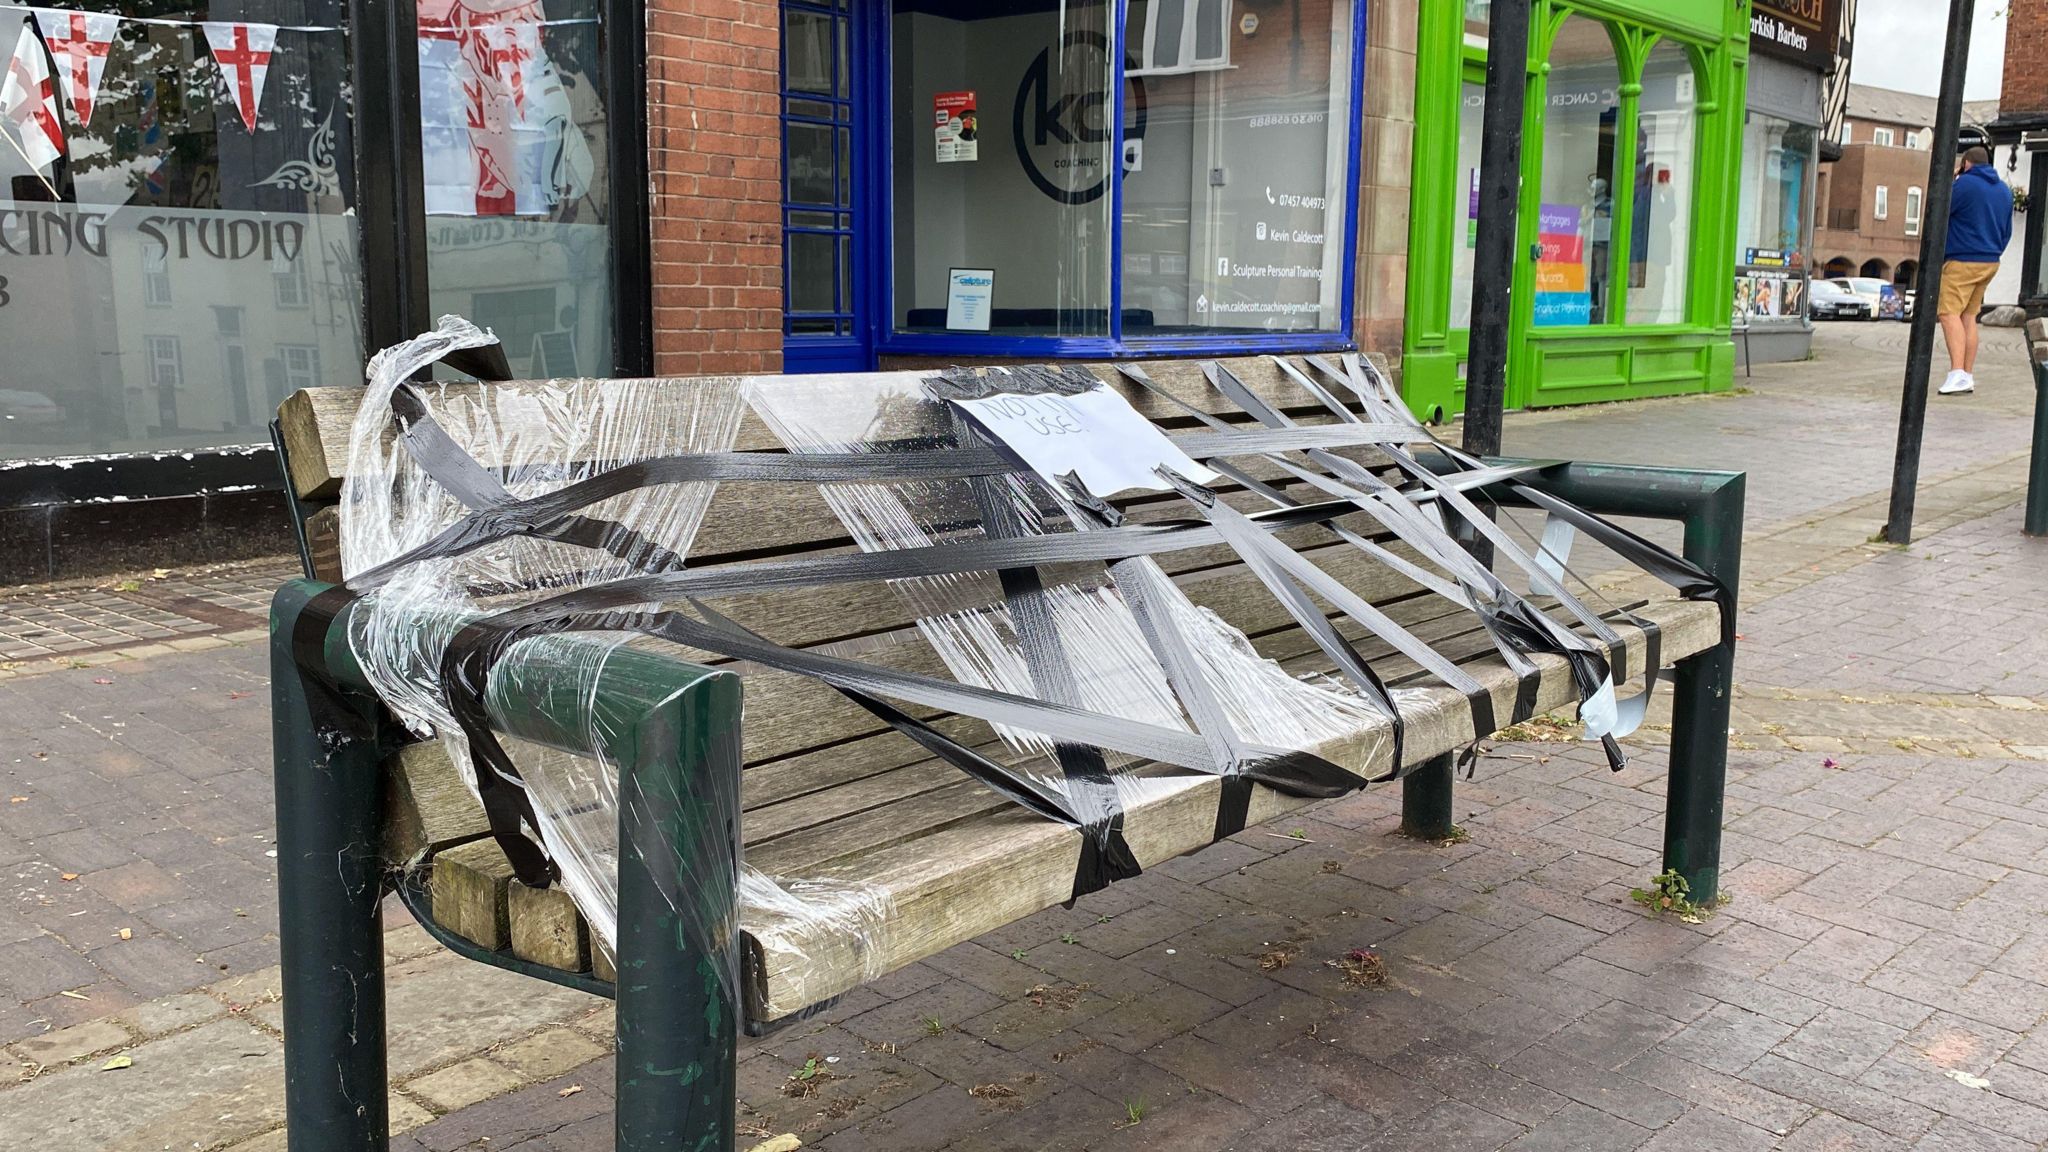 A bench with tape and clingfilm covering it